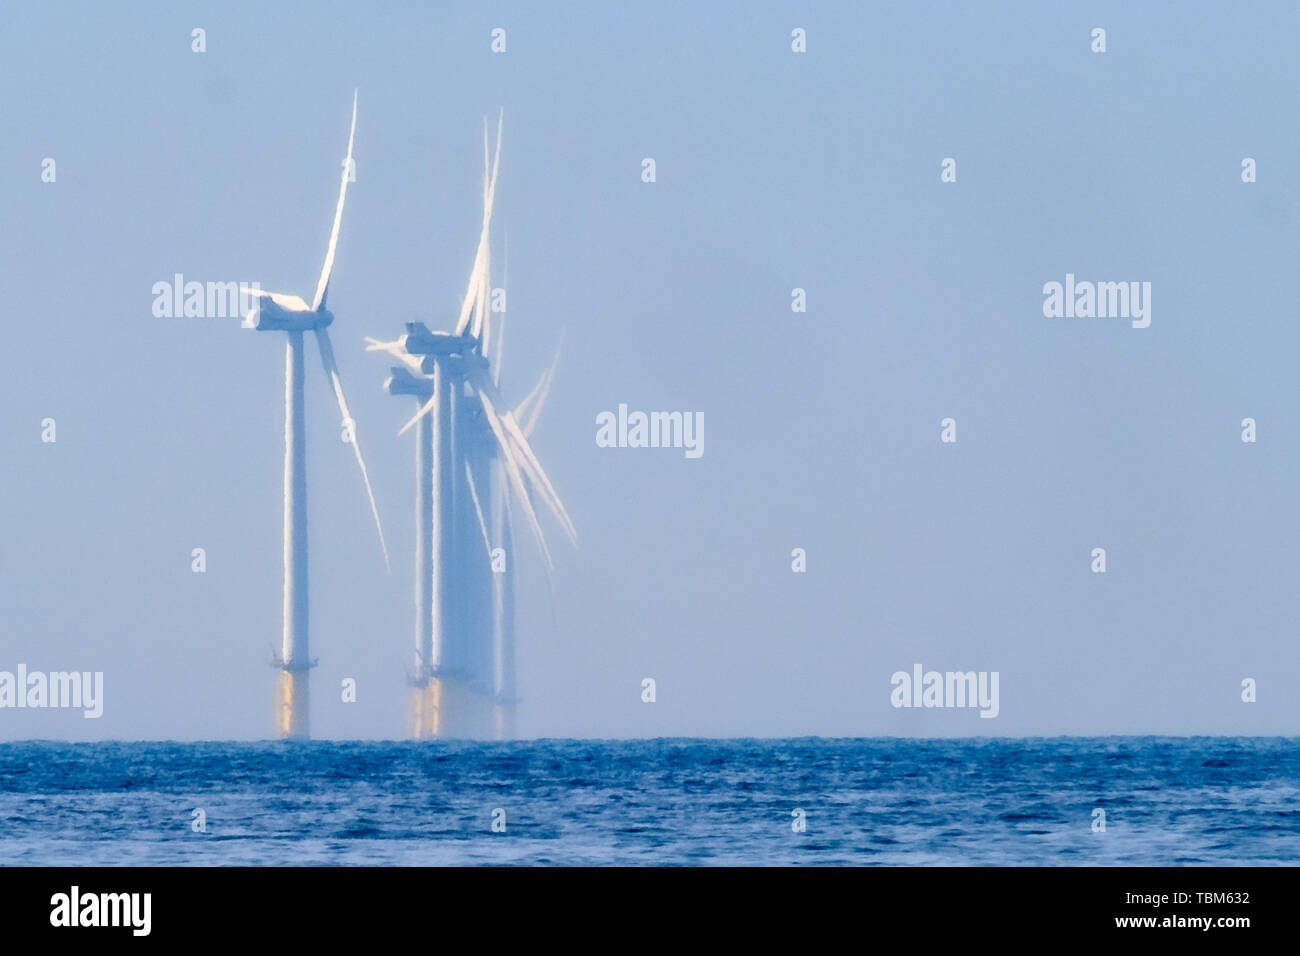 Rampion Wind Farm in the hazy morning sun on Sunday 2 June 2019 as photographed from Worthing Beach, Worthing. Rampion is an offshore wind farm, over 8 miles from the shore, development by E.ON, off the Sussex coast in the UK. The wind farm has a capacity of 400 MW. The wind farm was commissioned in April 2018. Picture by Julie Edwards. Stock Photo